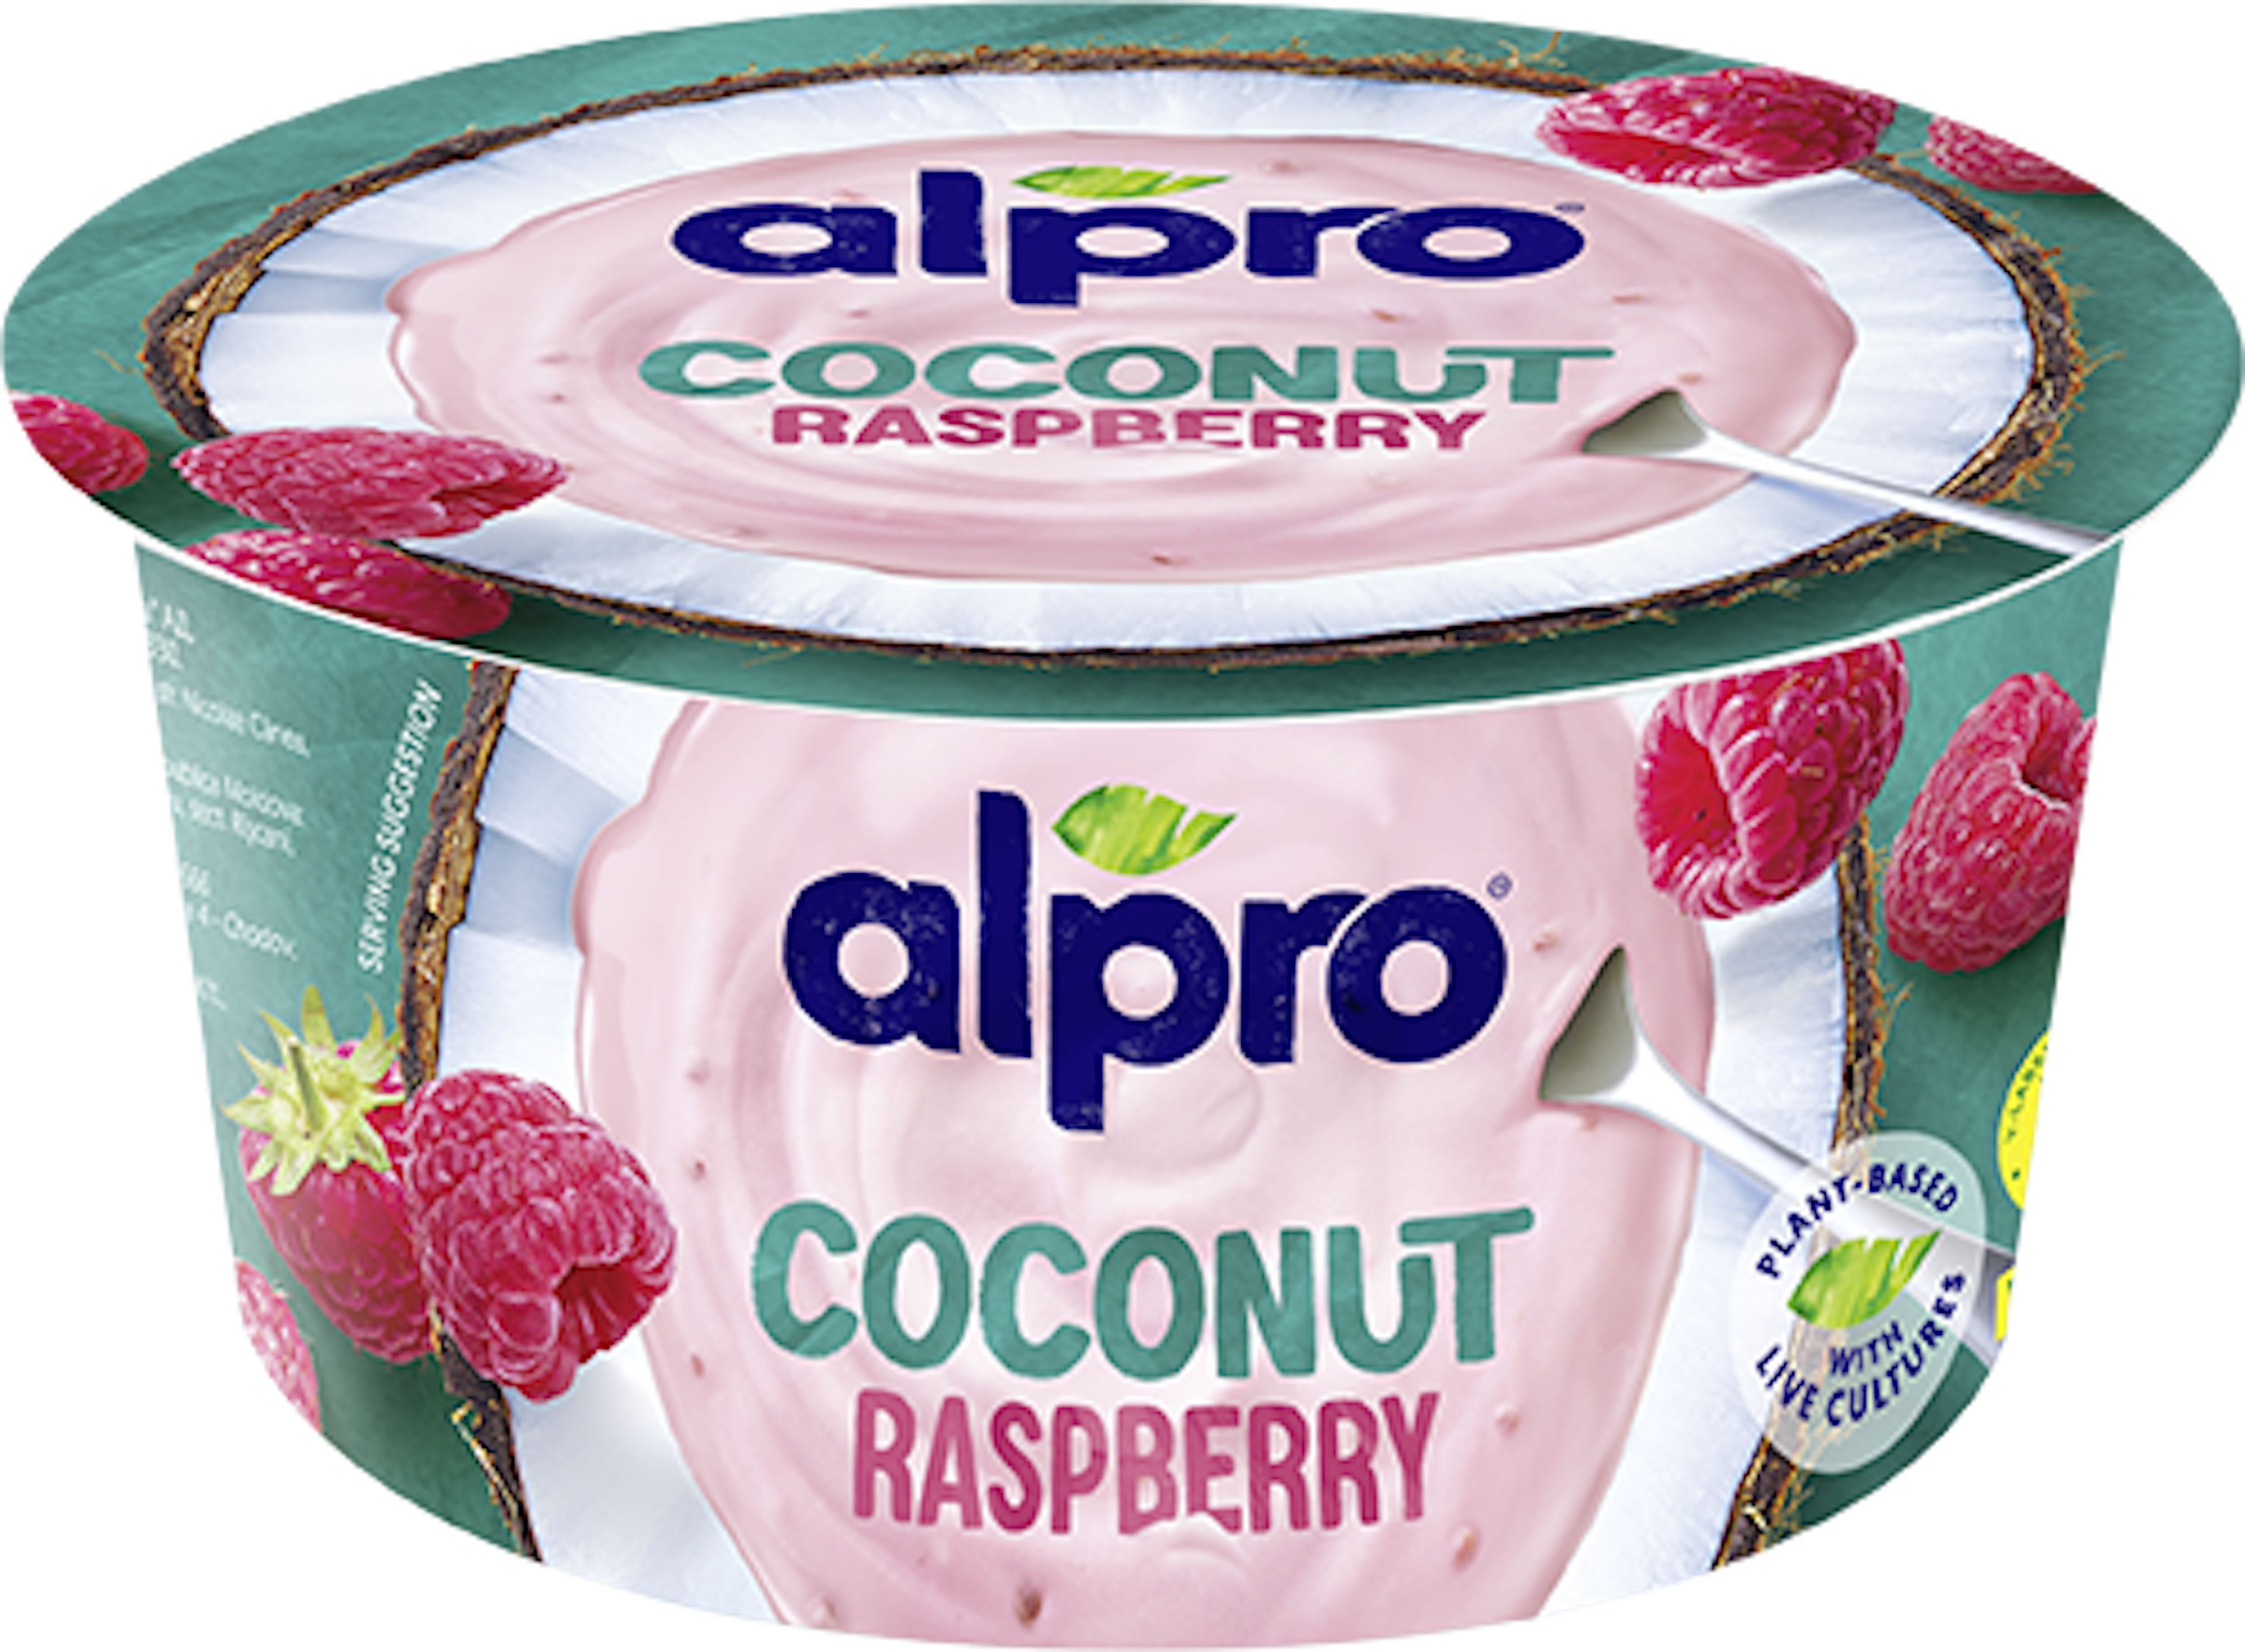 Absolutely Coconut Raspberry